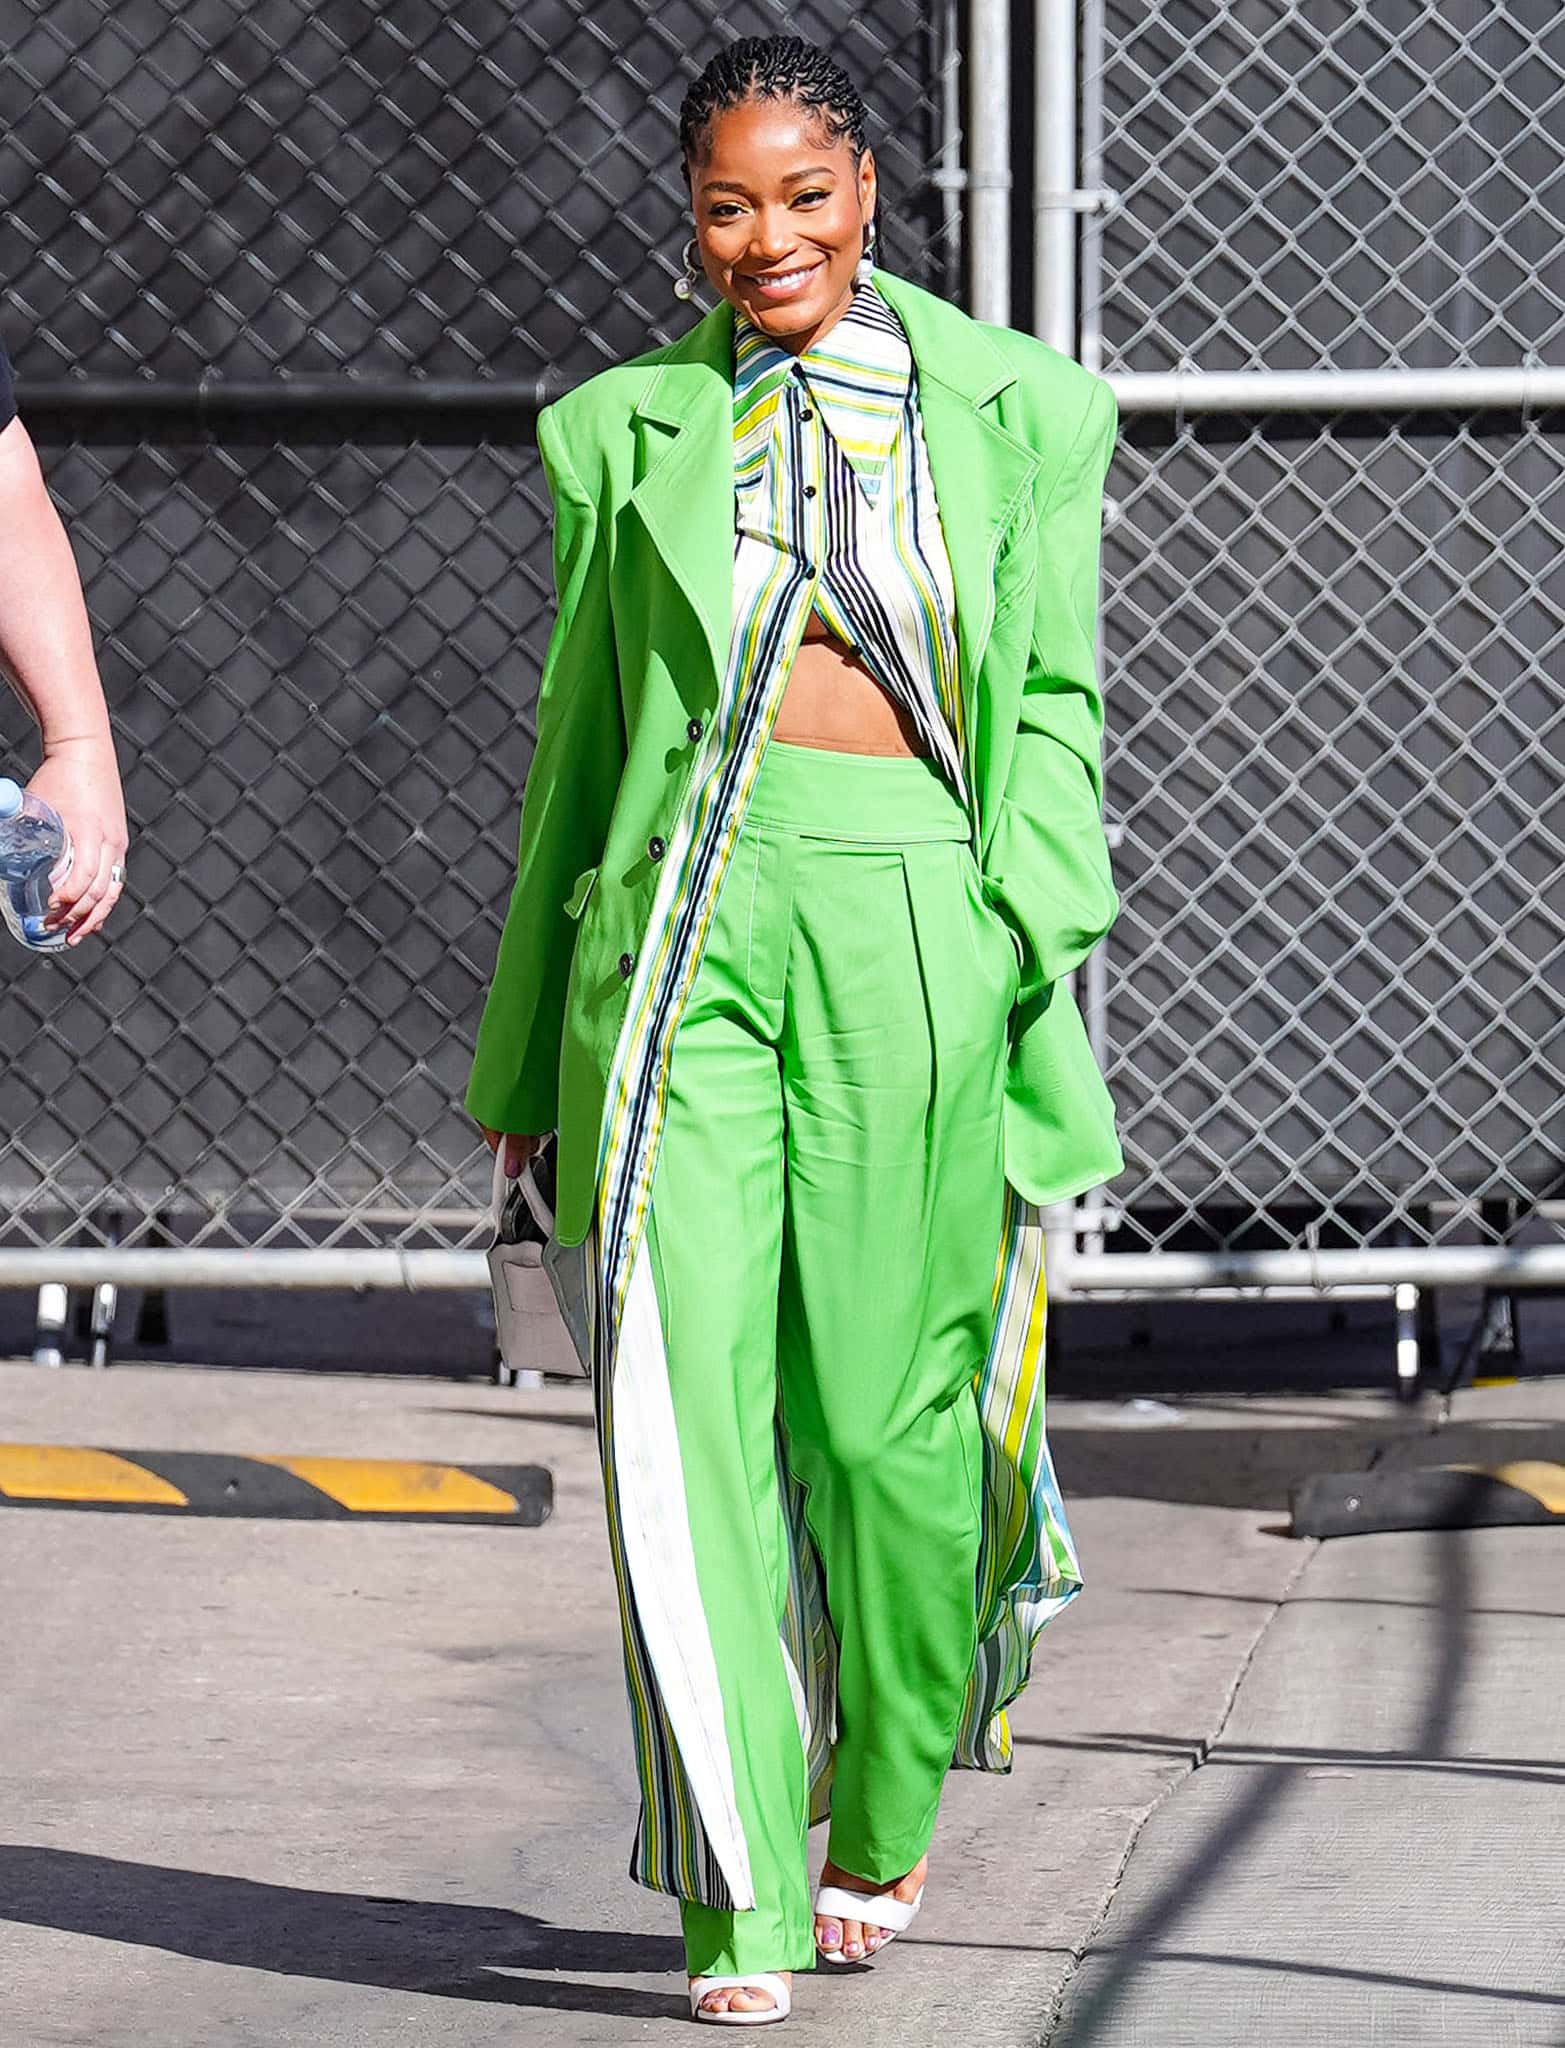 Keke Palmer pairs her green suit with multicolored striped shirt dress and Dolce & Gabbana white heels